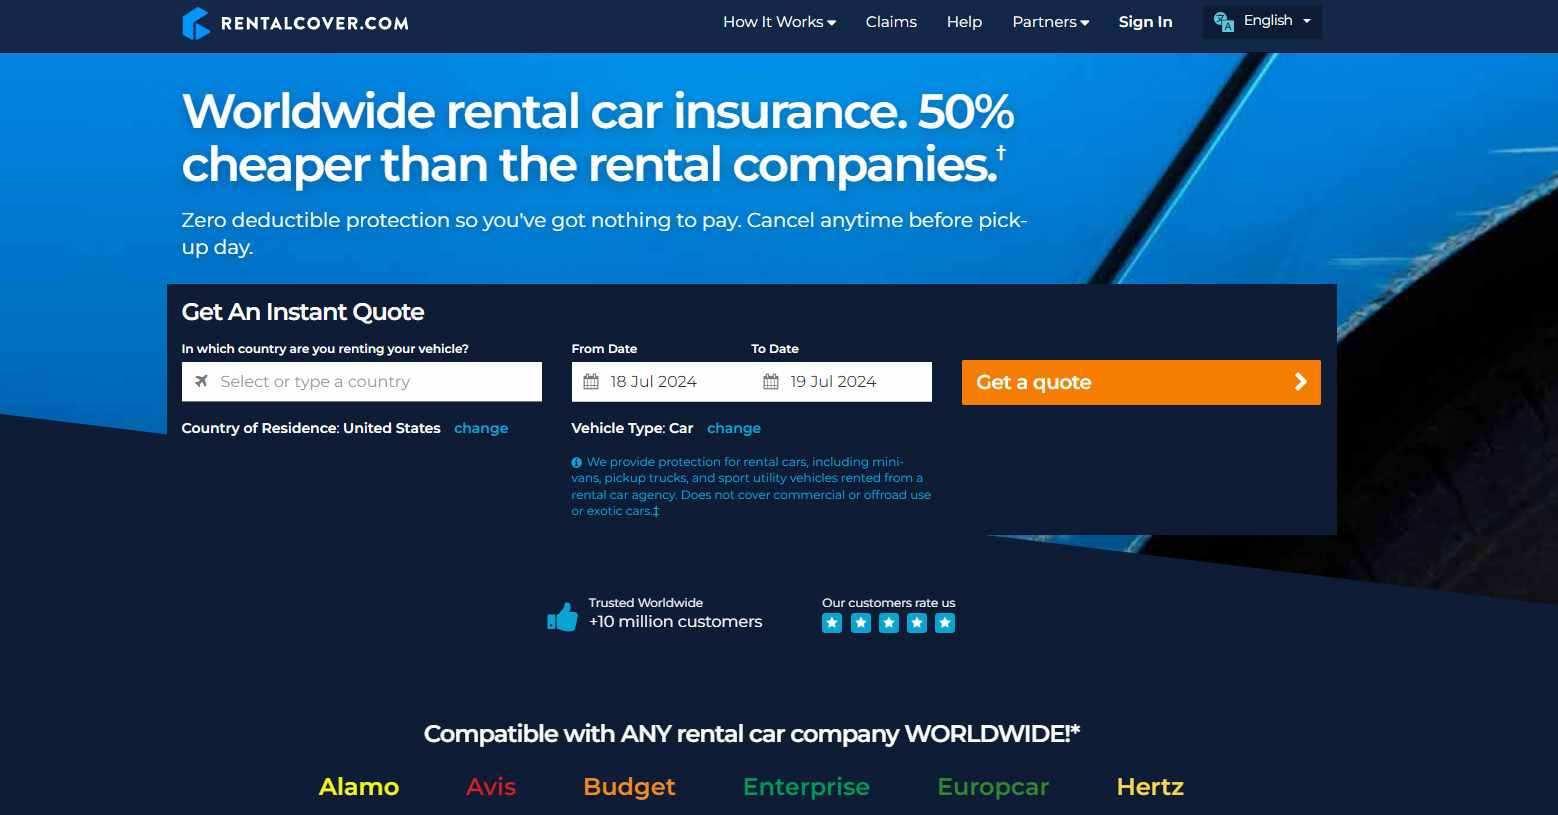 Does my auto insurance cover rental cars?: Rental Cover Site Screenshot